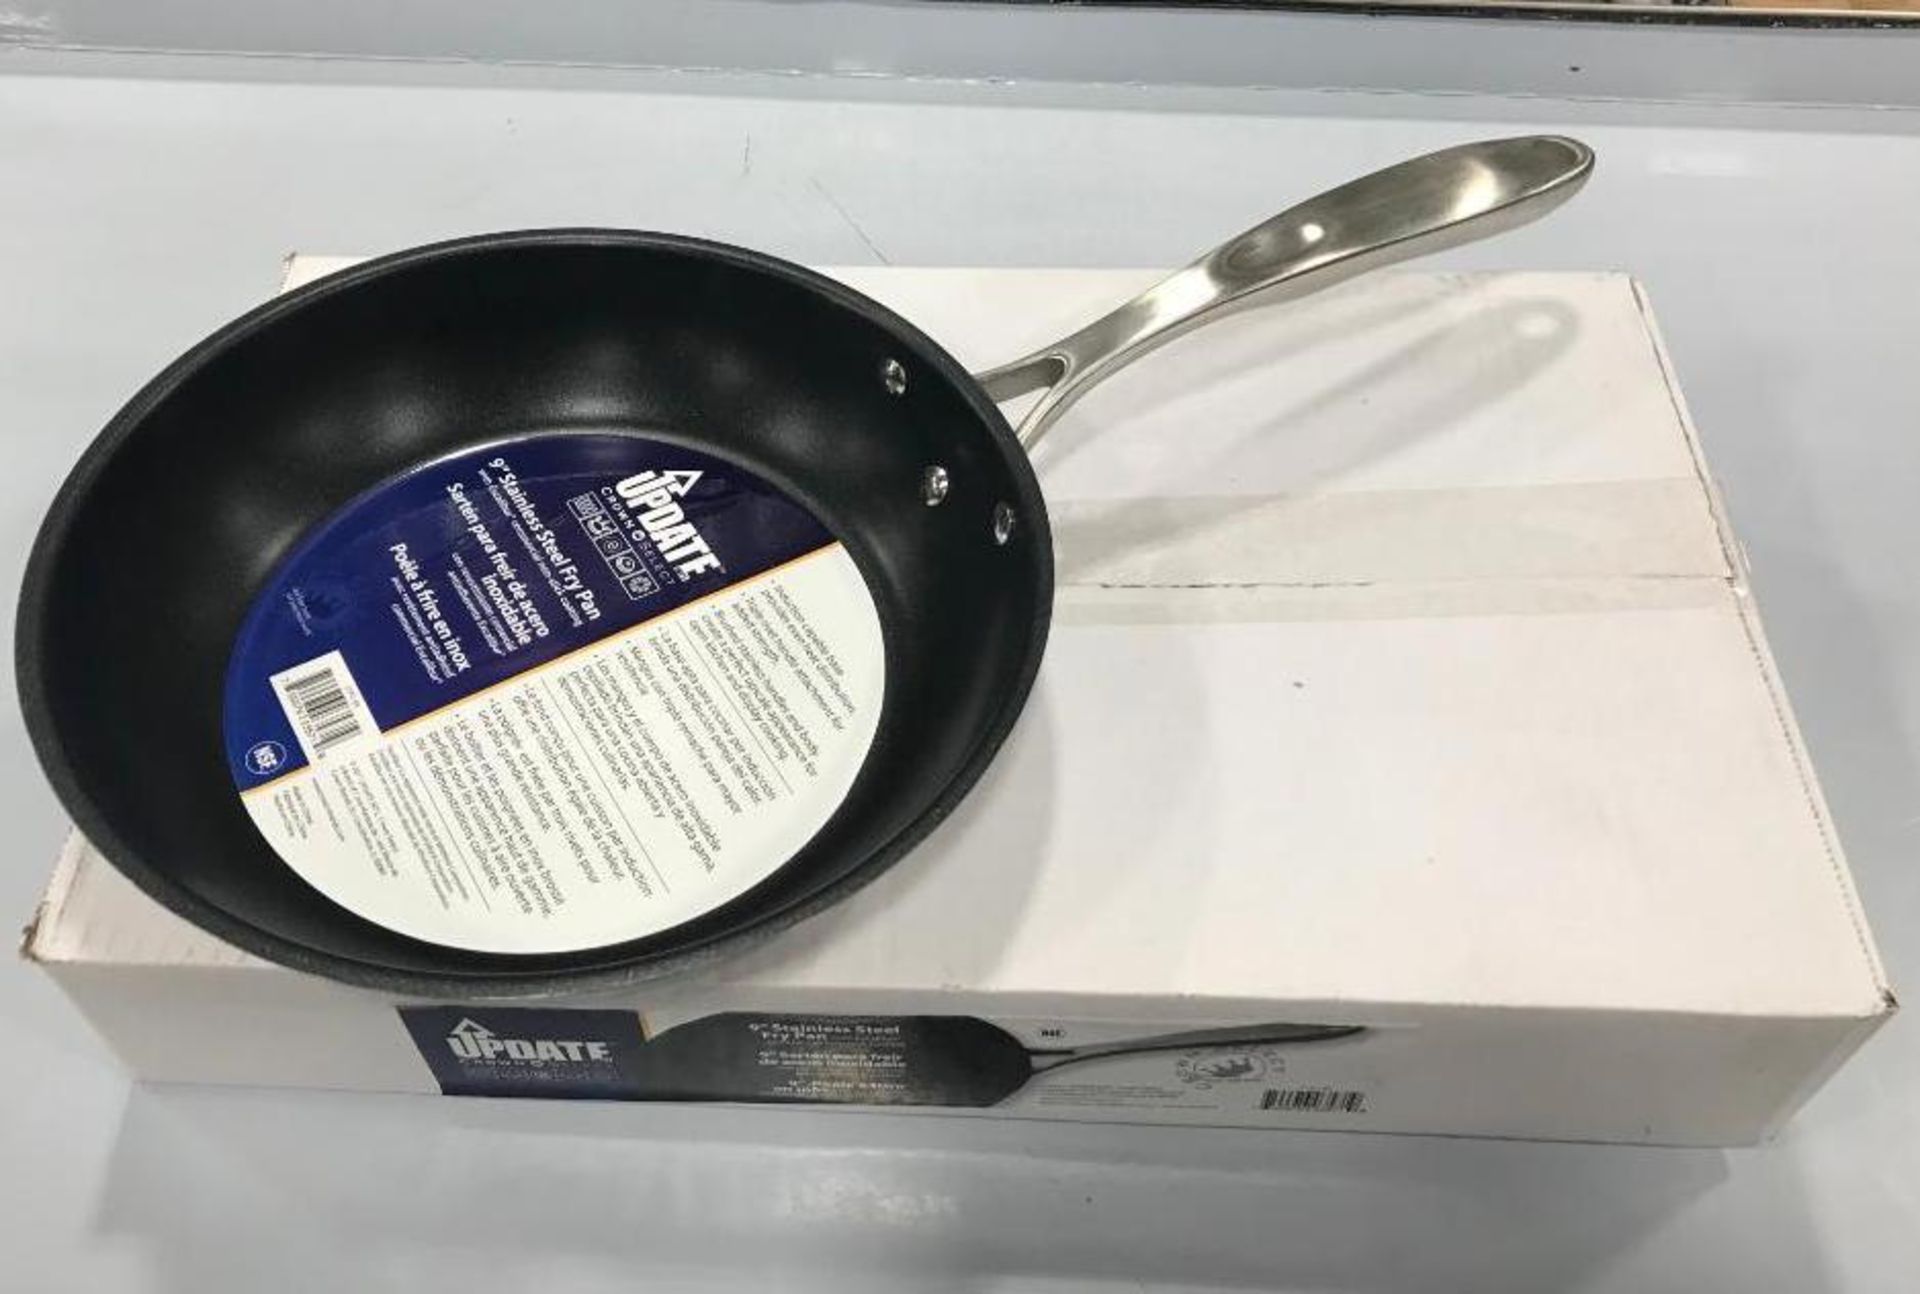 9" STAINLESS STEEL FRYING PAN W/ EXCALIBUR NON-STICK COATING - UPDATE CFPC-09 - NEW - Image 2 of 4